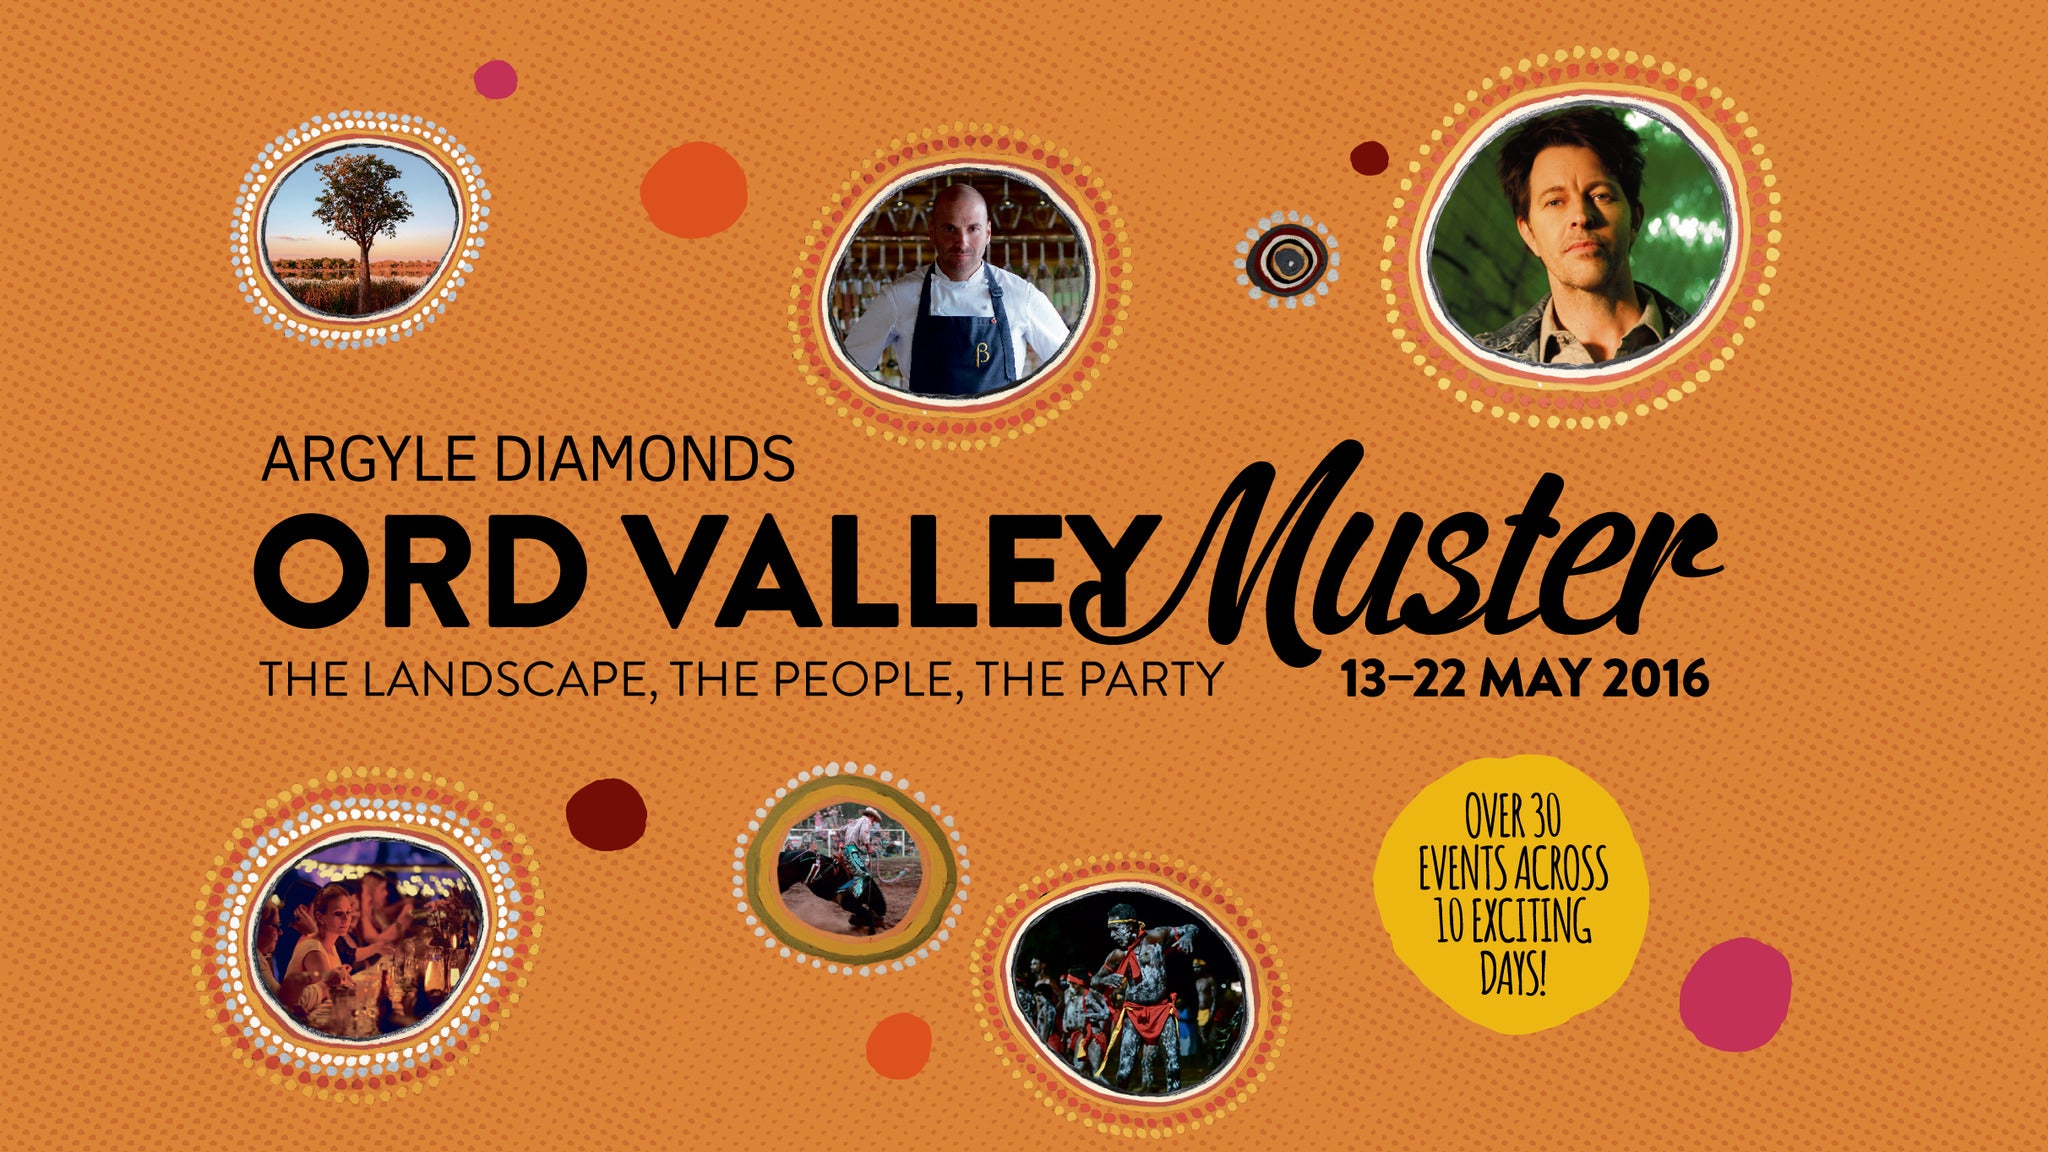 Image used with permission from Ticketmaster | Boab Metals Ord Valley Muster 2022 tickets